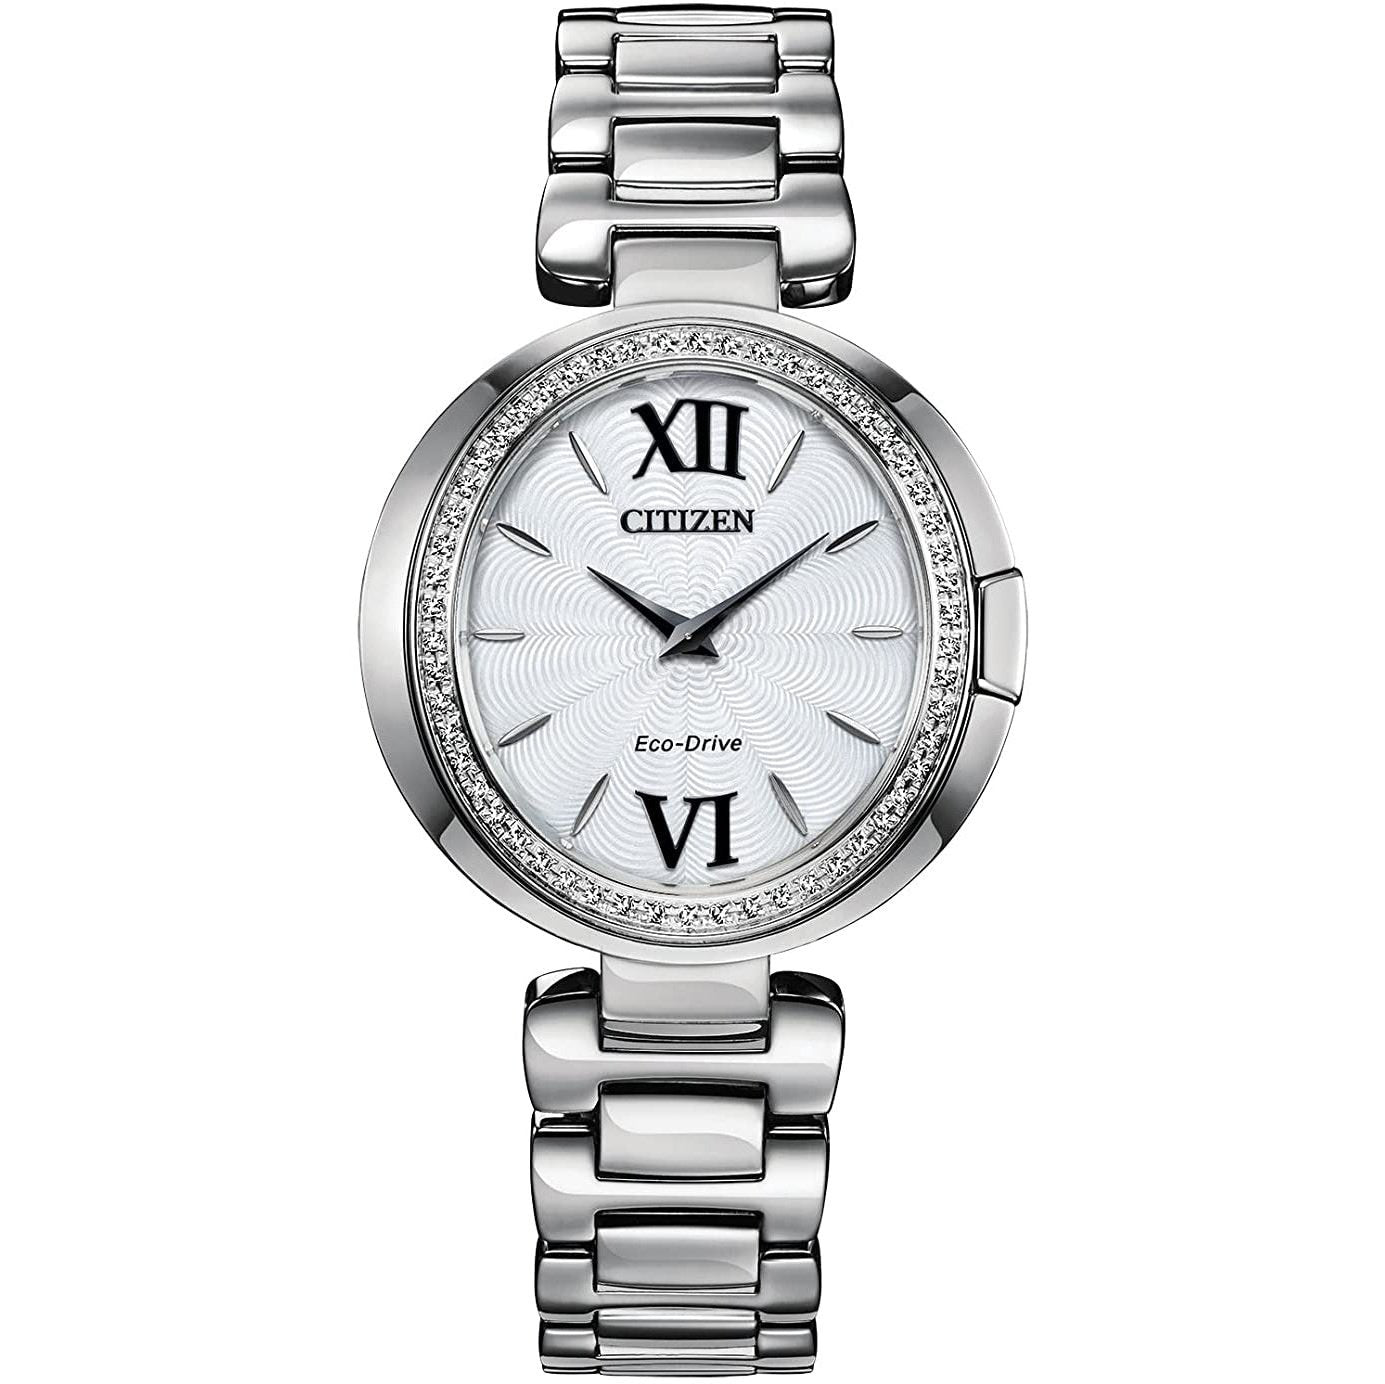 Citizen Women's Capella Eco-Drive Watch with Stainless Steel Strap